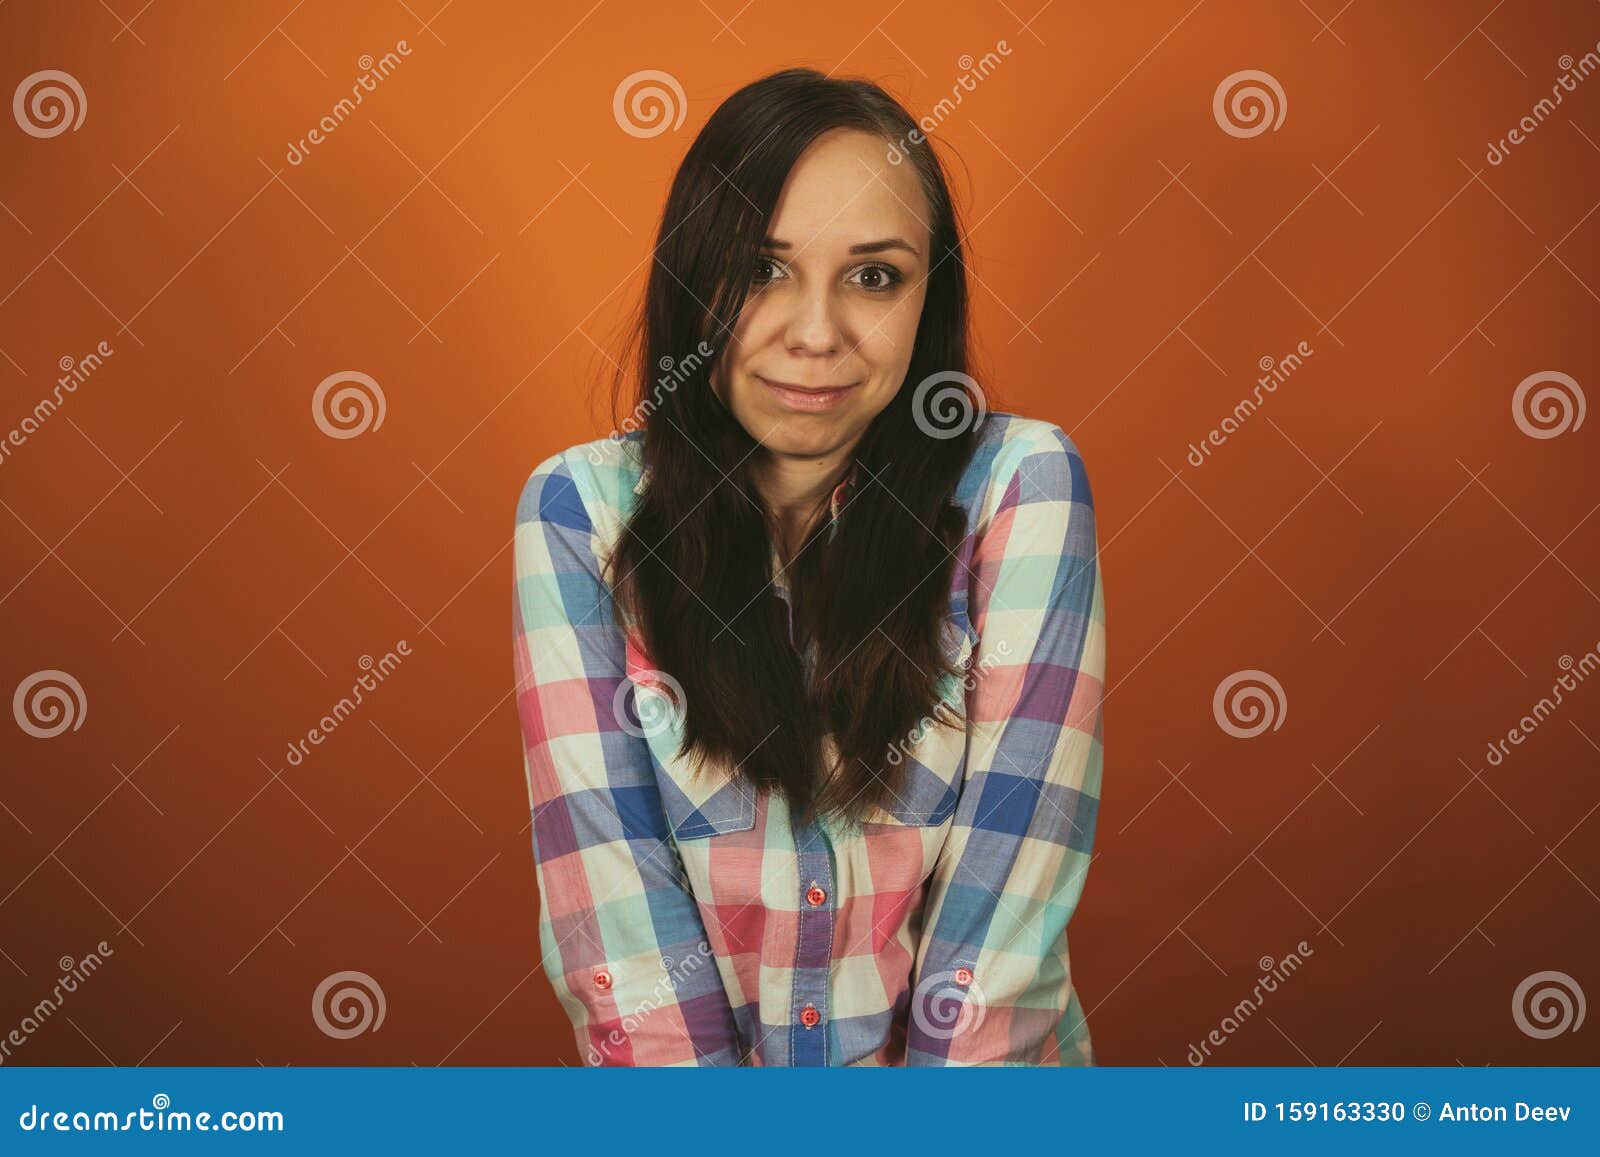 A Beautiful Woman In A Plaid Shirt Poses On An Orange Background Stock